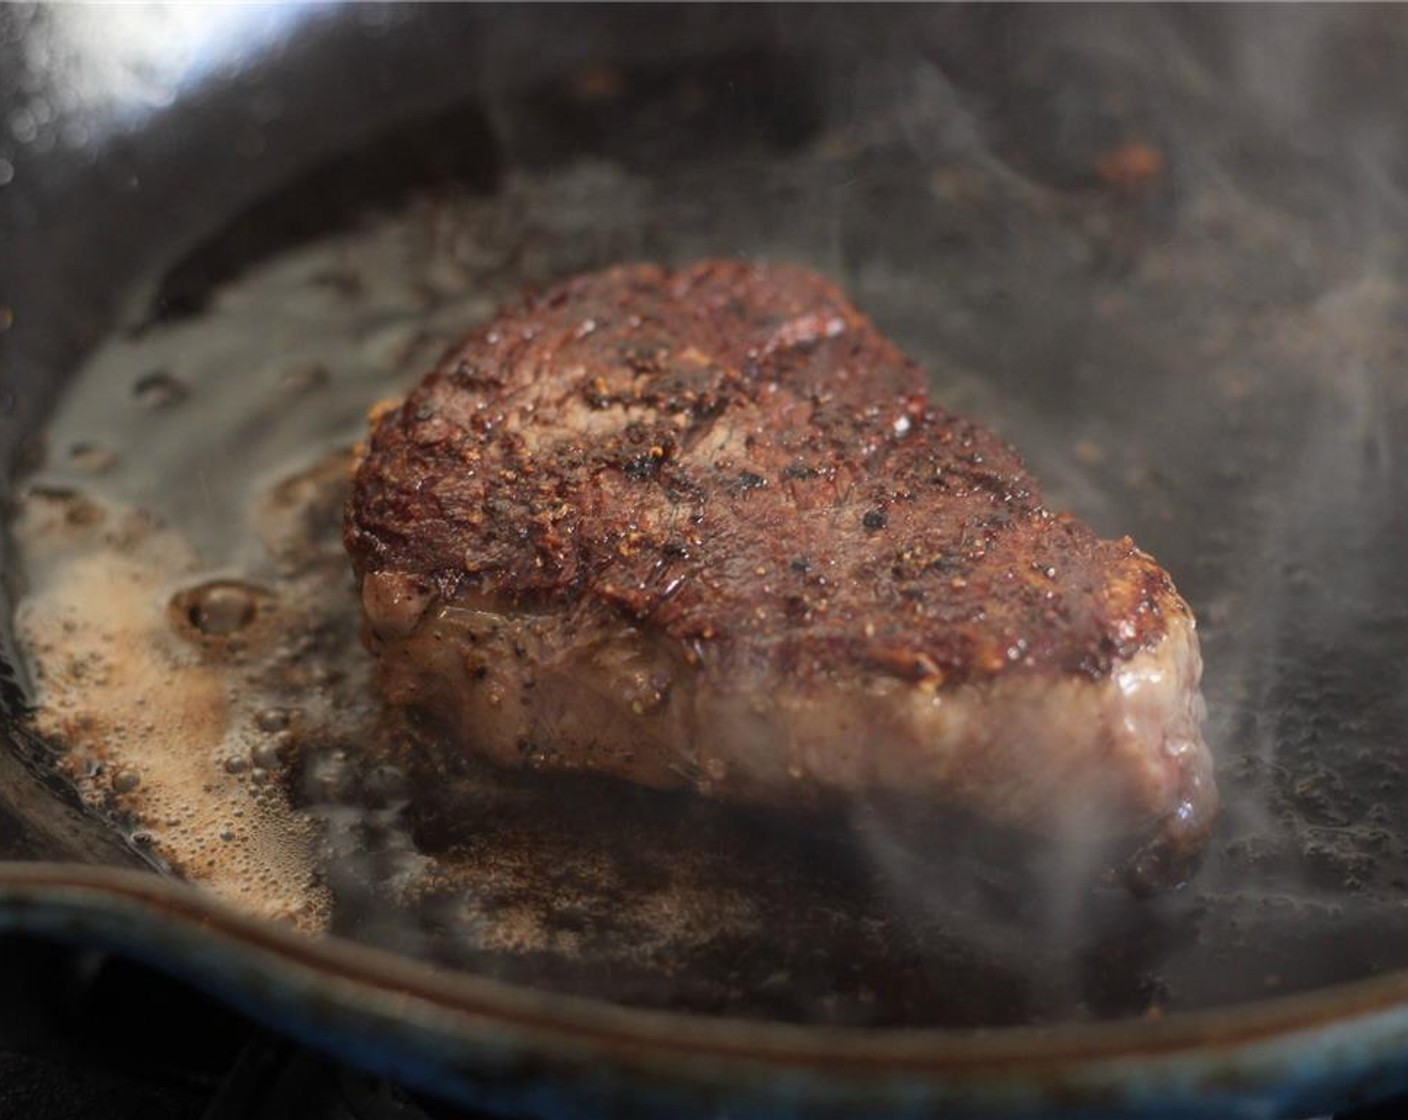 step 3 When the steaks have a brown crust on both sides, remove them from the pan and set aside. Cover to keep warm.